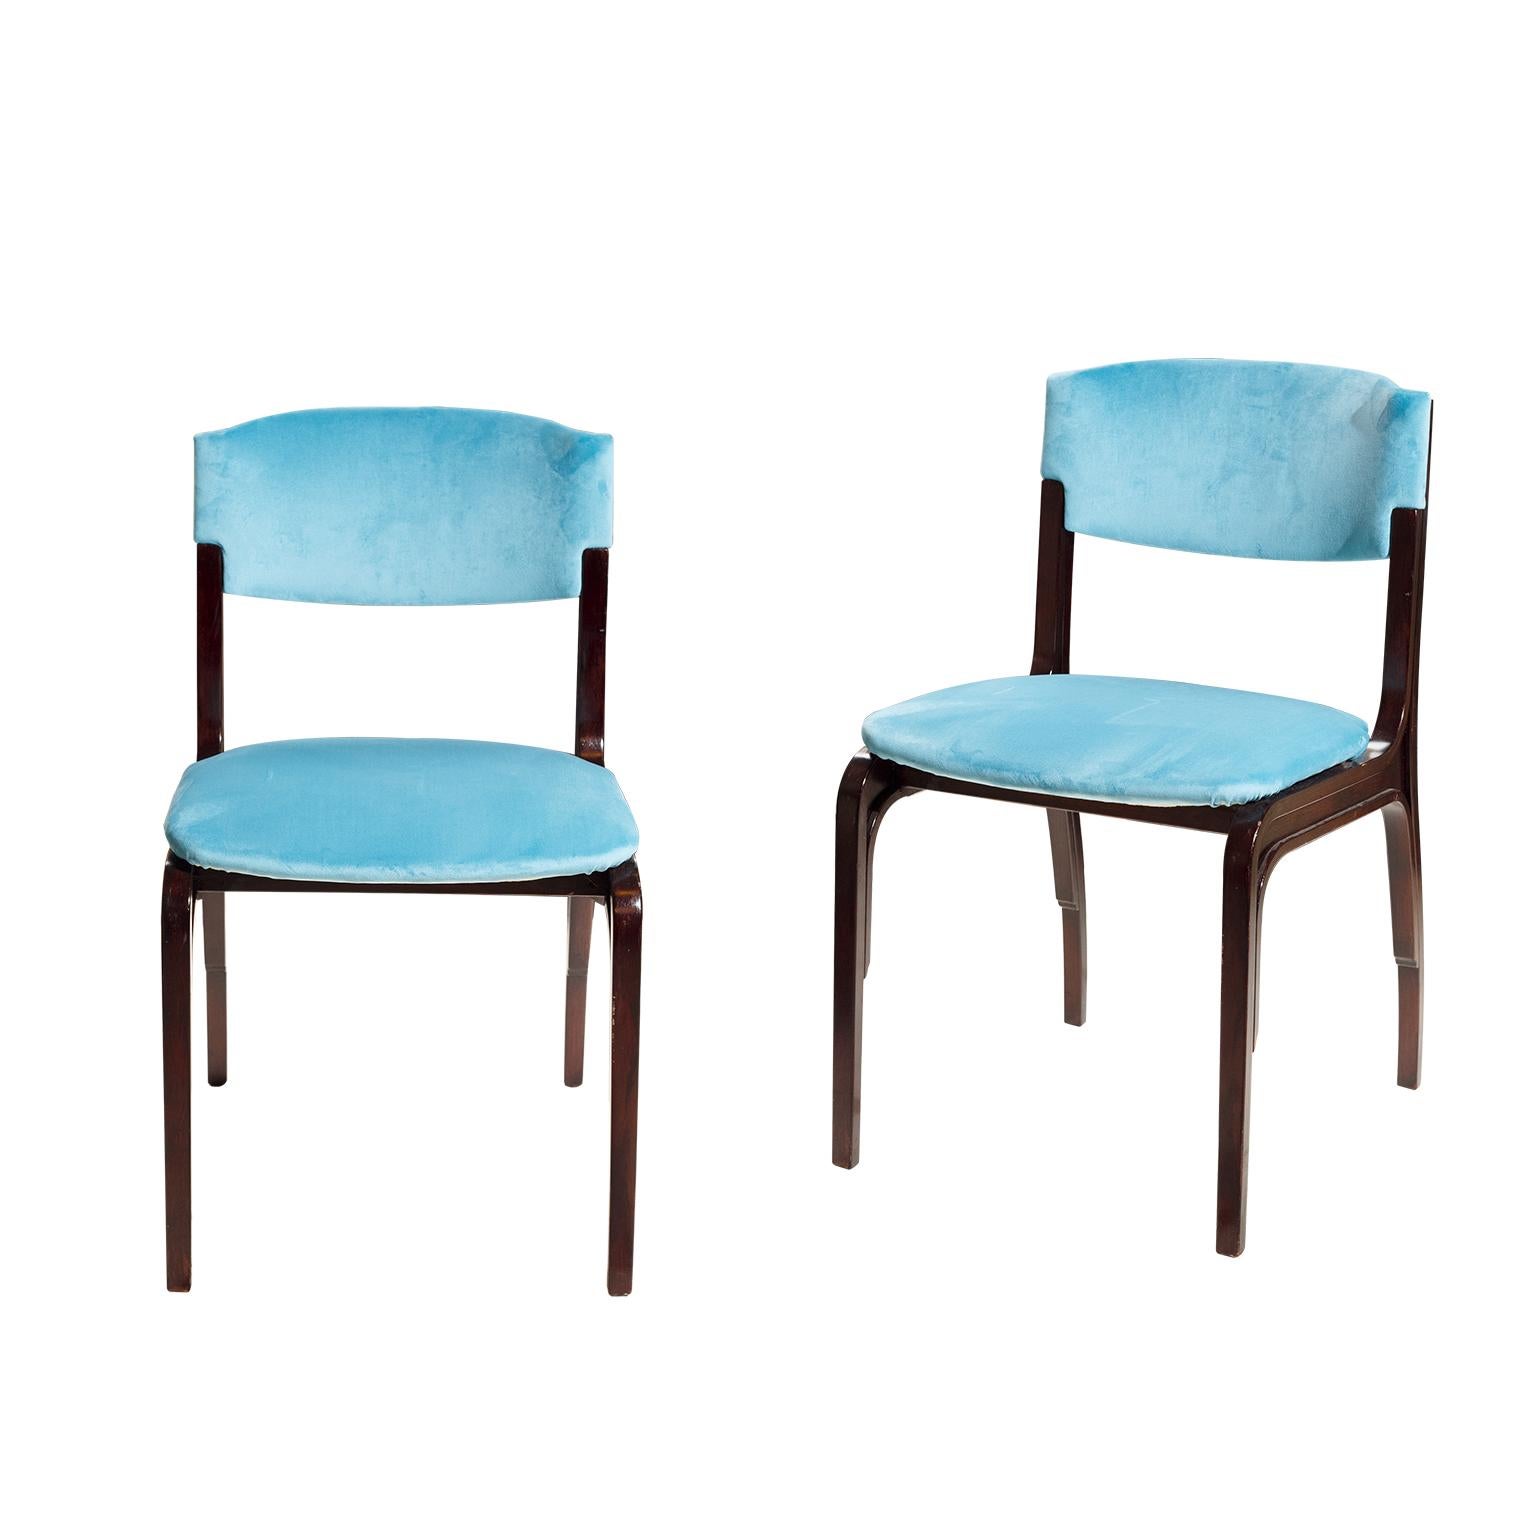 G.F. Frattini 5 Blue Velvet Chairs Mid-Century Modern From Cantieri Carugati For Sale 3